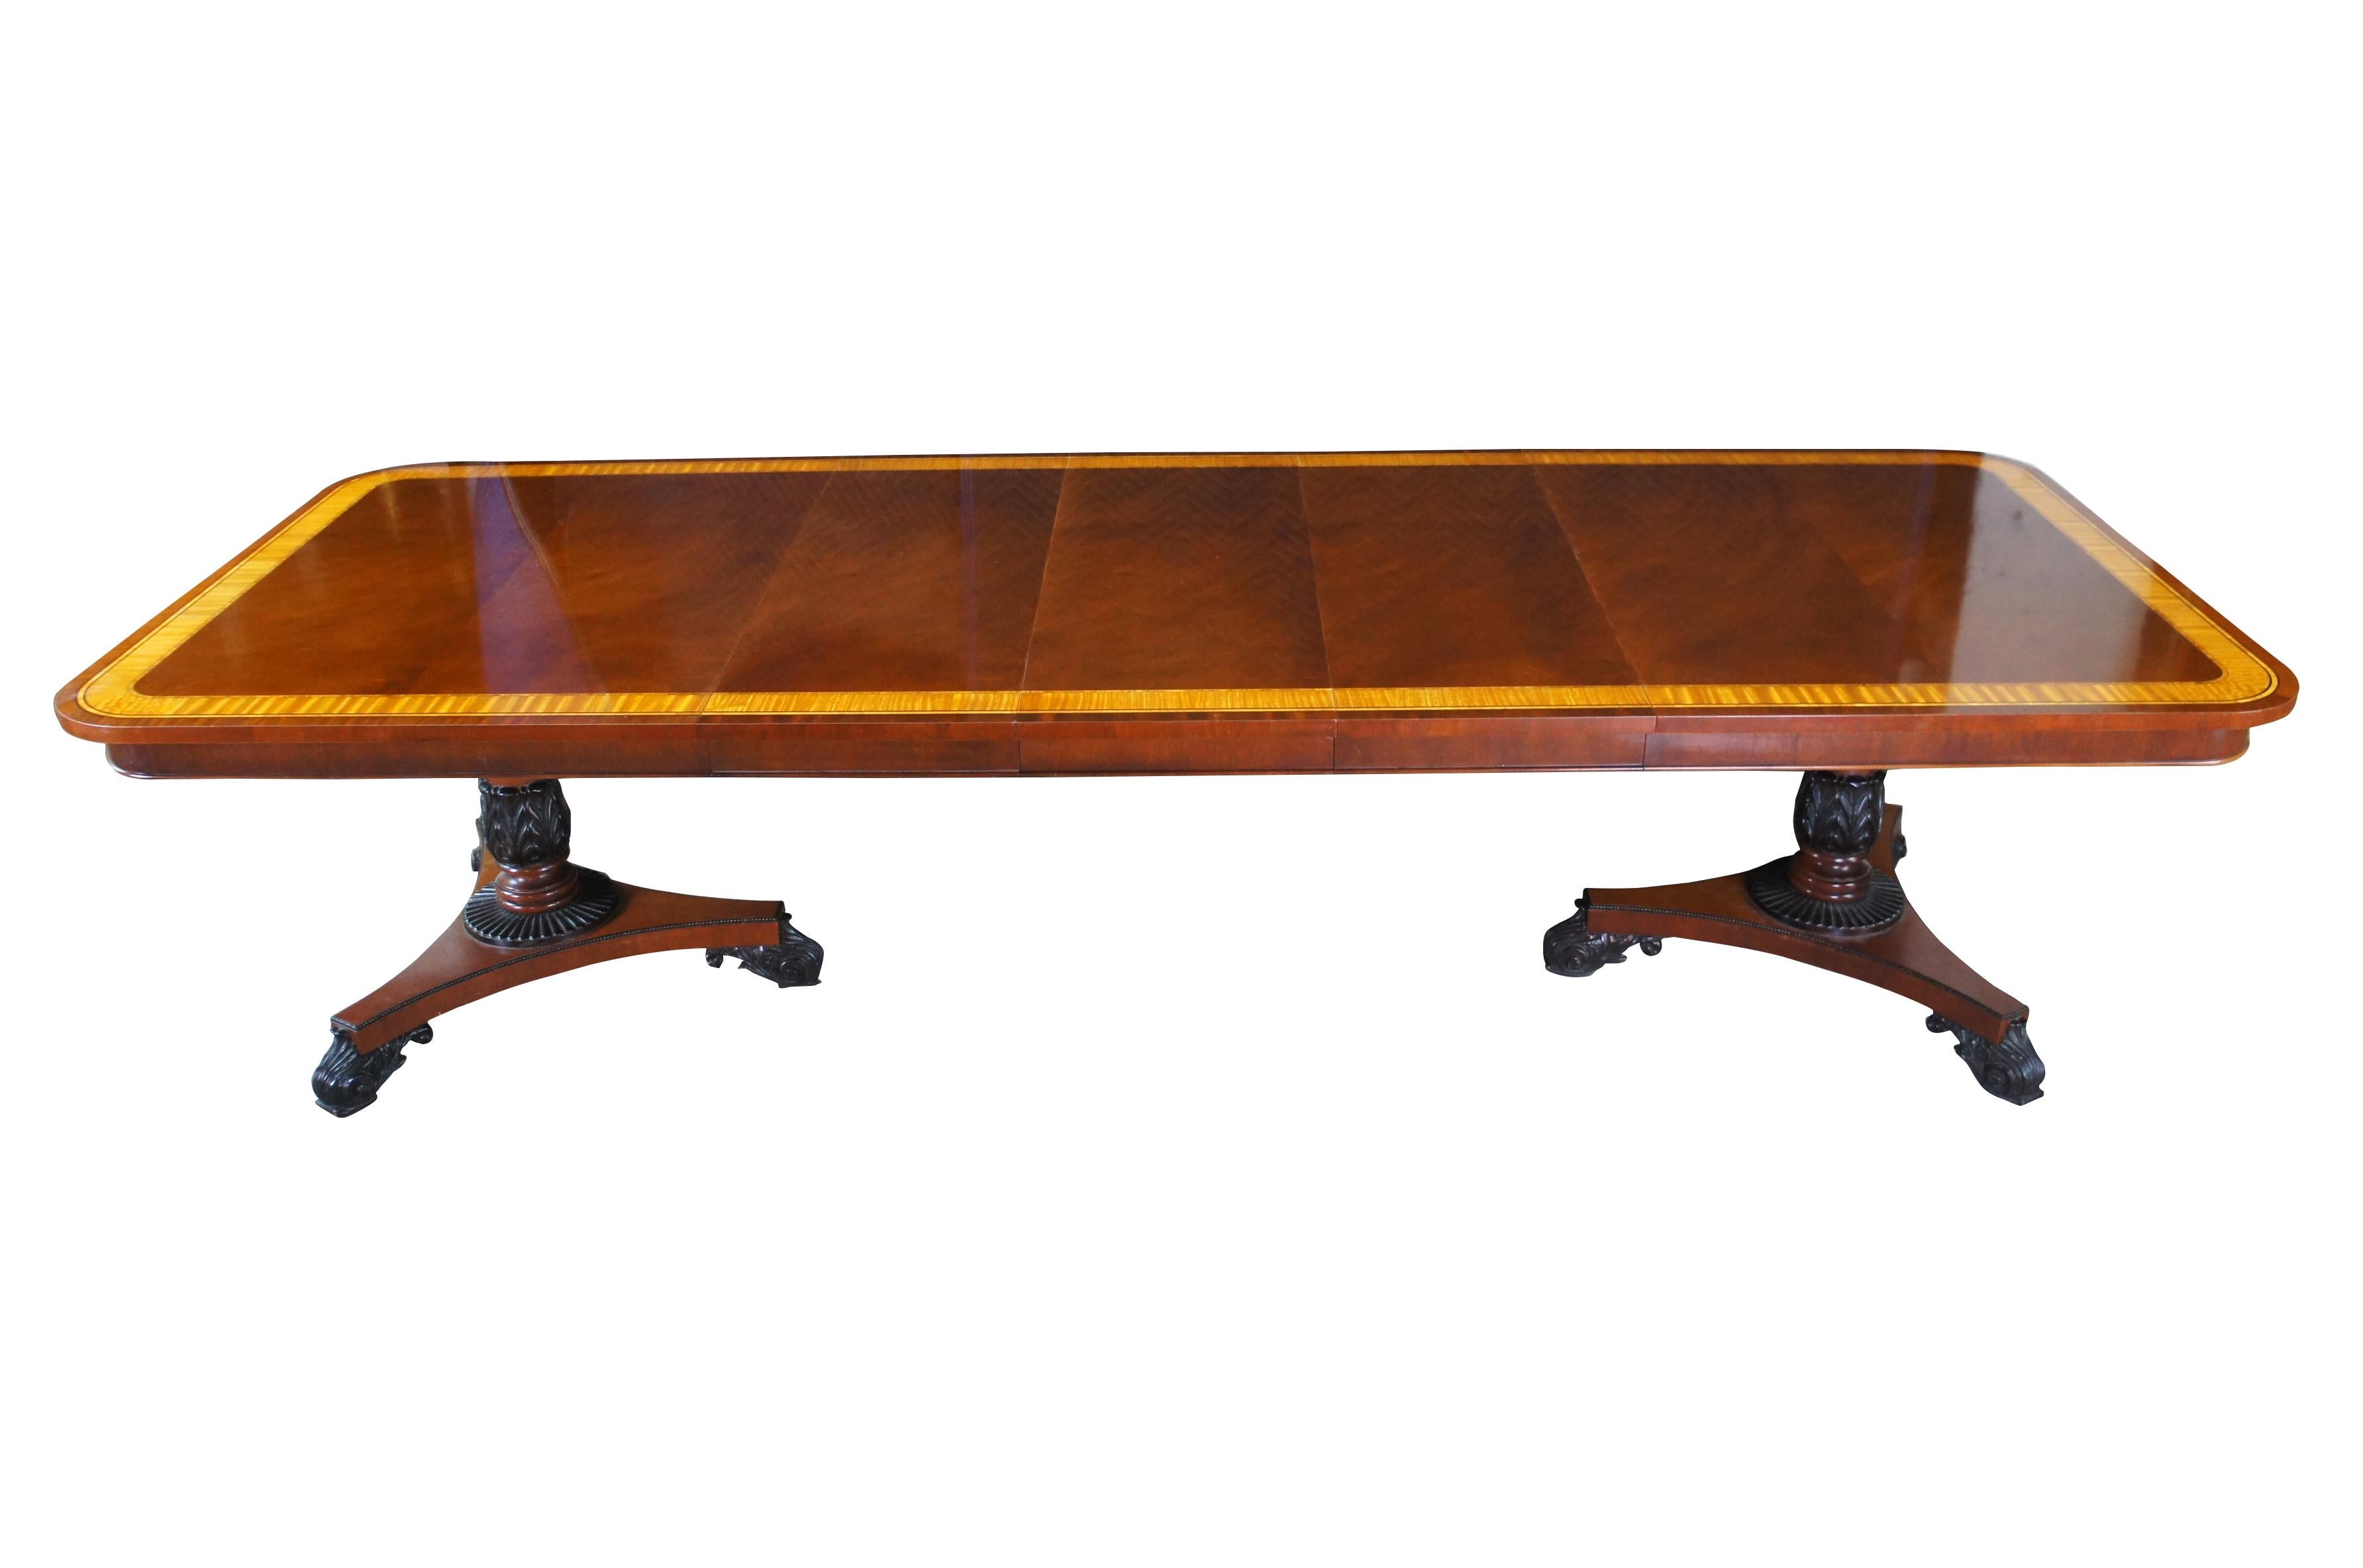 Exceptional Baker Furniture Company Dining or conference Table, circa early 2000s.  Inspired by English Regency, Neoclassical and French Empire styling.  A rectangular form with flame (crotch) mahogany top with satinwood banding and ebonized inlay.